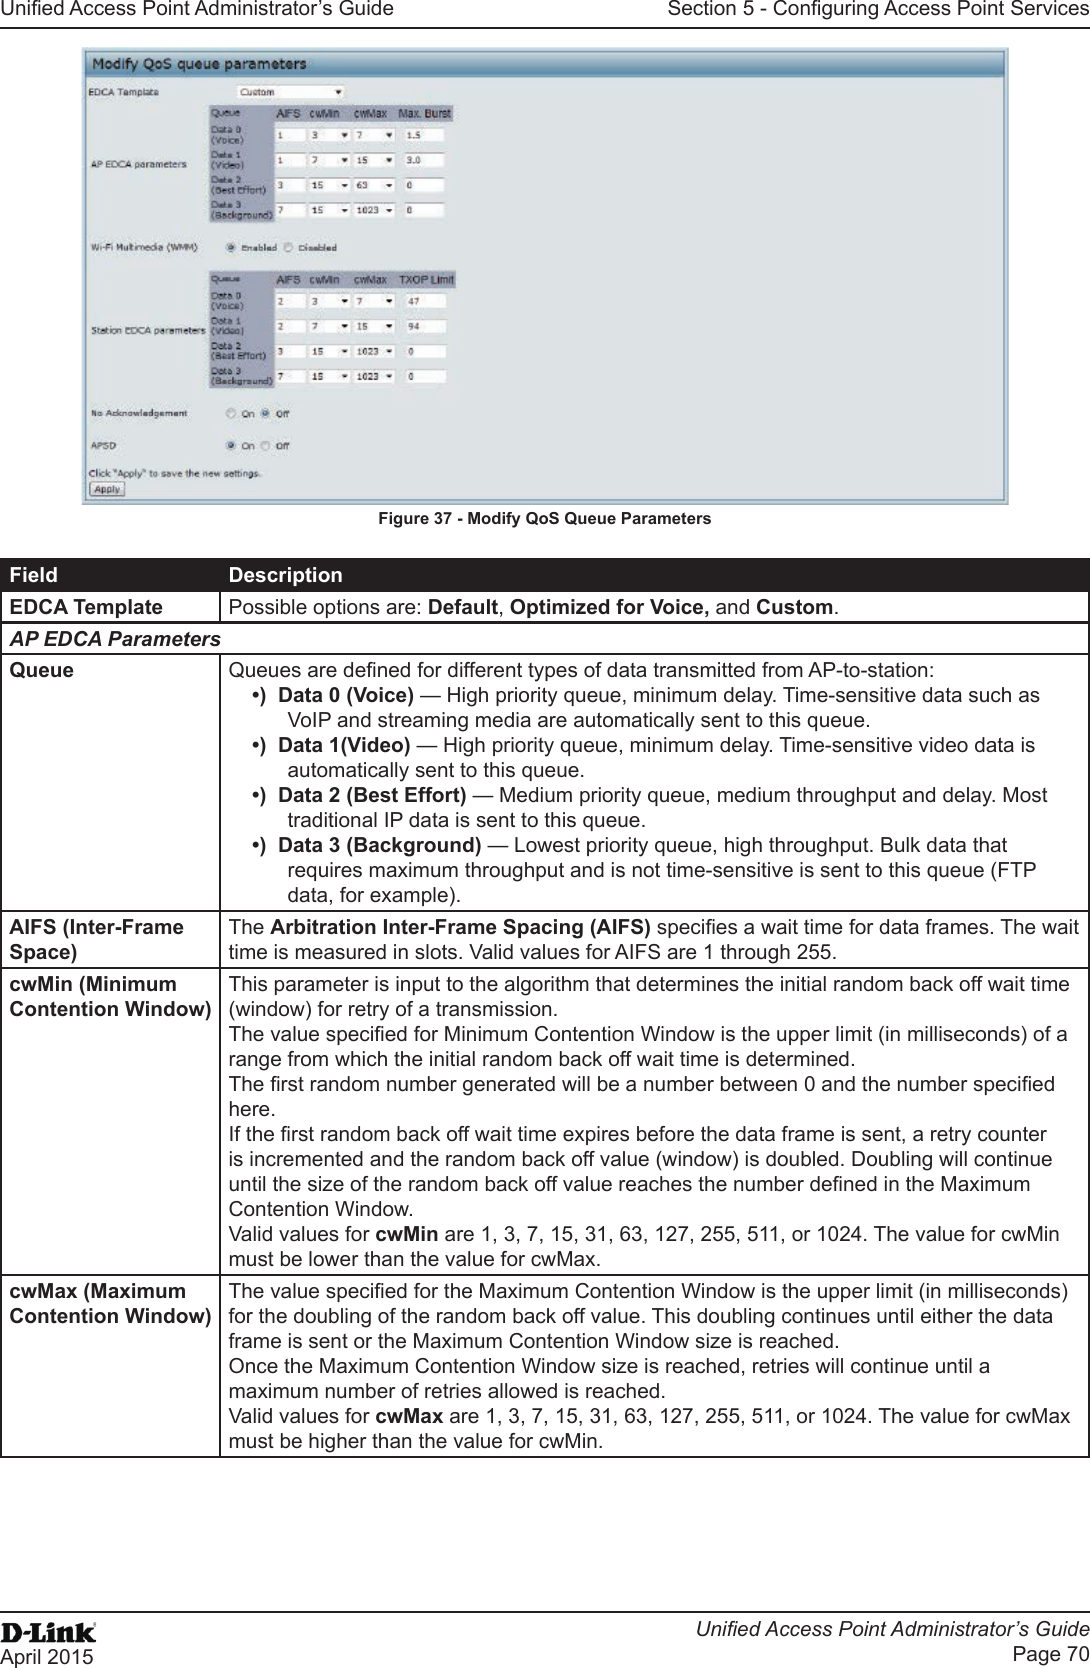 Unied Access Point Administrator’s GuideUnied Access Point Administrator’s GuidePage 70April 2015Section 5 - Conguring Access Point ServicesFigure 37 - Modify QoS Queue ParametersField DescriptionEDCA Template Possible options are: Default, Optimized for Voice, and Custom.AP EDCA ParametersQueue Queues are dened for different types of data transmitted from AP-to-station:•)  Data 0 (Voice) — High priority queue, minimum delay. Time-sensitive data such as VoIP and streaming media are automatically sent to this queue.•)  Data 1(Video) — High priority queue, minimum delay. Time-sensitive video data is automatically sent to this queue.•)  Data 2 (Best Effort) — Medium priority queue, medium throughput and delay. Most traditional IP data is sent to this queue.•)  Data 3 (Background) — Lowest priority queue, high throughput. Bulk data that requires maximum throughput and is not time-sensitive is sent to this queue (FTP data, for example).AIFS (Inter-Frame Space)The Arbitration Inter-Frame Spacing (AIFS) species a wait time for data frames. The wait time is measured in slots. Valid values for AIFS are 1 through 255.cwMin (Minimum Contention Window)This parameter is input to the algorithm that determines the initial random back off wait time (window) for retry of a transmission. The value specied for Minimum Contention Window is the upper limit (in milliseconds) of a range from which the initial random back off wait time is determined.The rst random number generated will be a number between 0 and the number specied here.If the rst random back off wait time expires before the data frame is sent, a retry counter is incremented and the random back off value (window) is doubled. Doubling will continue until the size of the random back off value reaches the number dened in the Maximum Contention Window.Valid values for cwMin are 1, 3, 7, 15, 31, 63, 127, 255, 511, or 1024. The value for cwMin must be lower than the value for cwMax.cwMax (Maximum Contention Window)The value specied for the Maximum Contention Window is the upper limit (in milliseconds) for the doubling of the random back off value. This doubling continues until either the data frame is sent or the Maximum Contention Window size is reached.Once the Maximum Contention Window size is reached, retries will continue until a maximum number of retries allowed is reached.Valid values for cwMax are 1, 3, 7, 15, 31, 63, 127, 255, 511, or 1024. The value for cwMax must be higher than the value for cwMin.